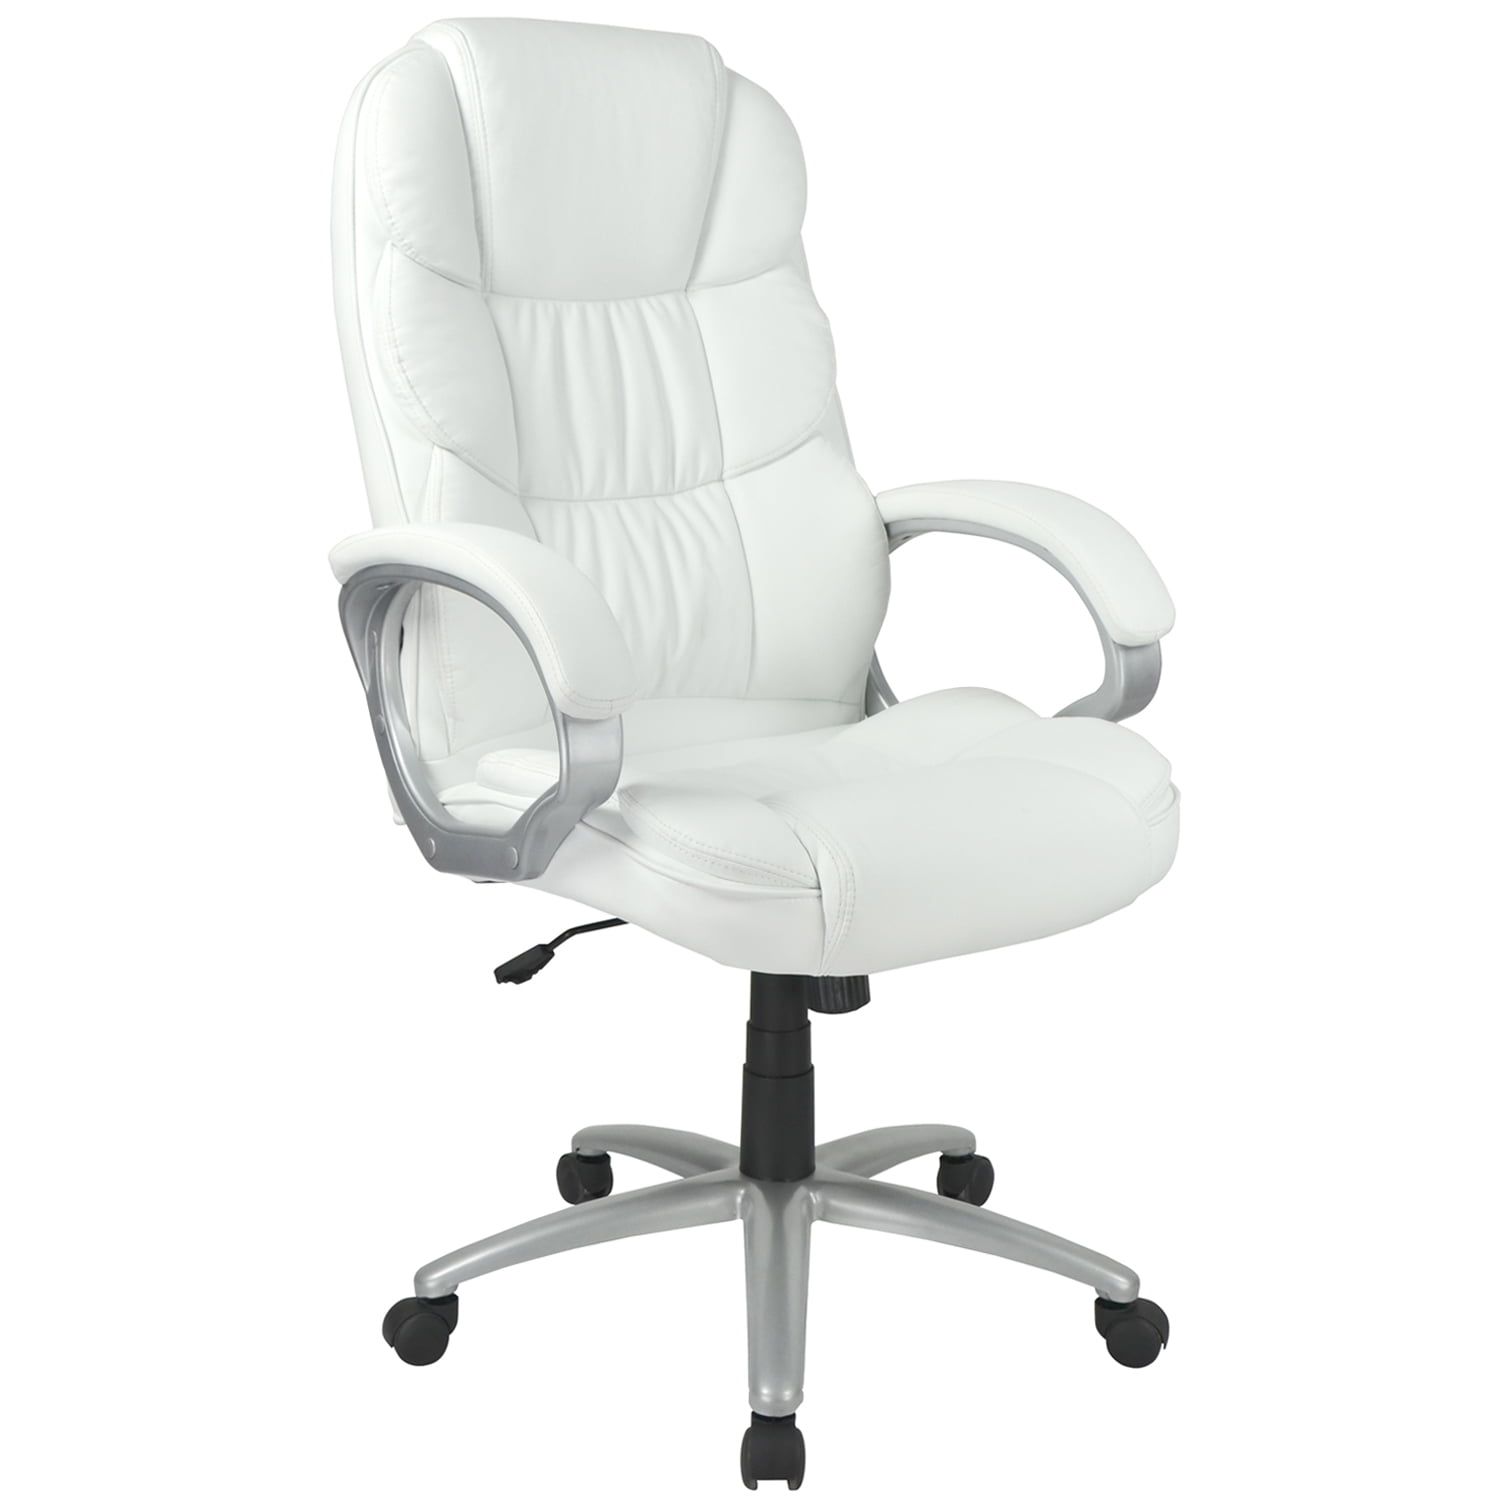  White Chair For Desk Walmart for Large Space